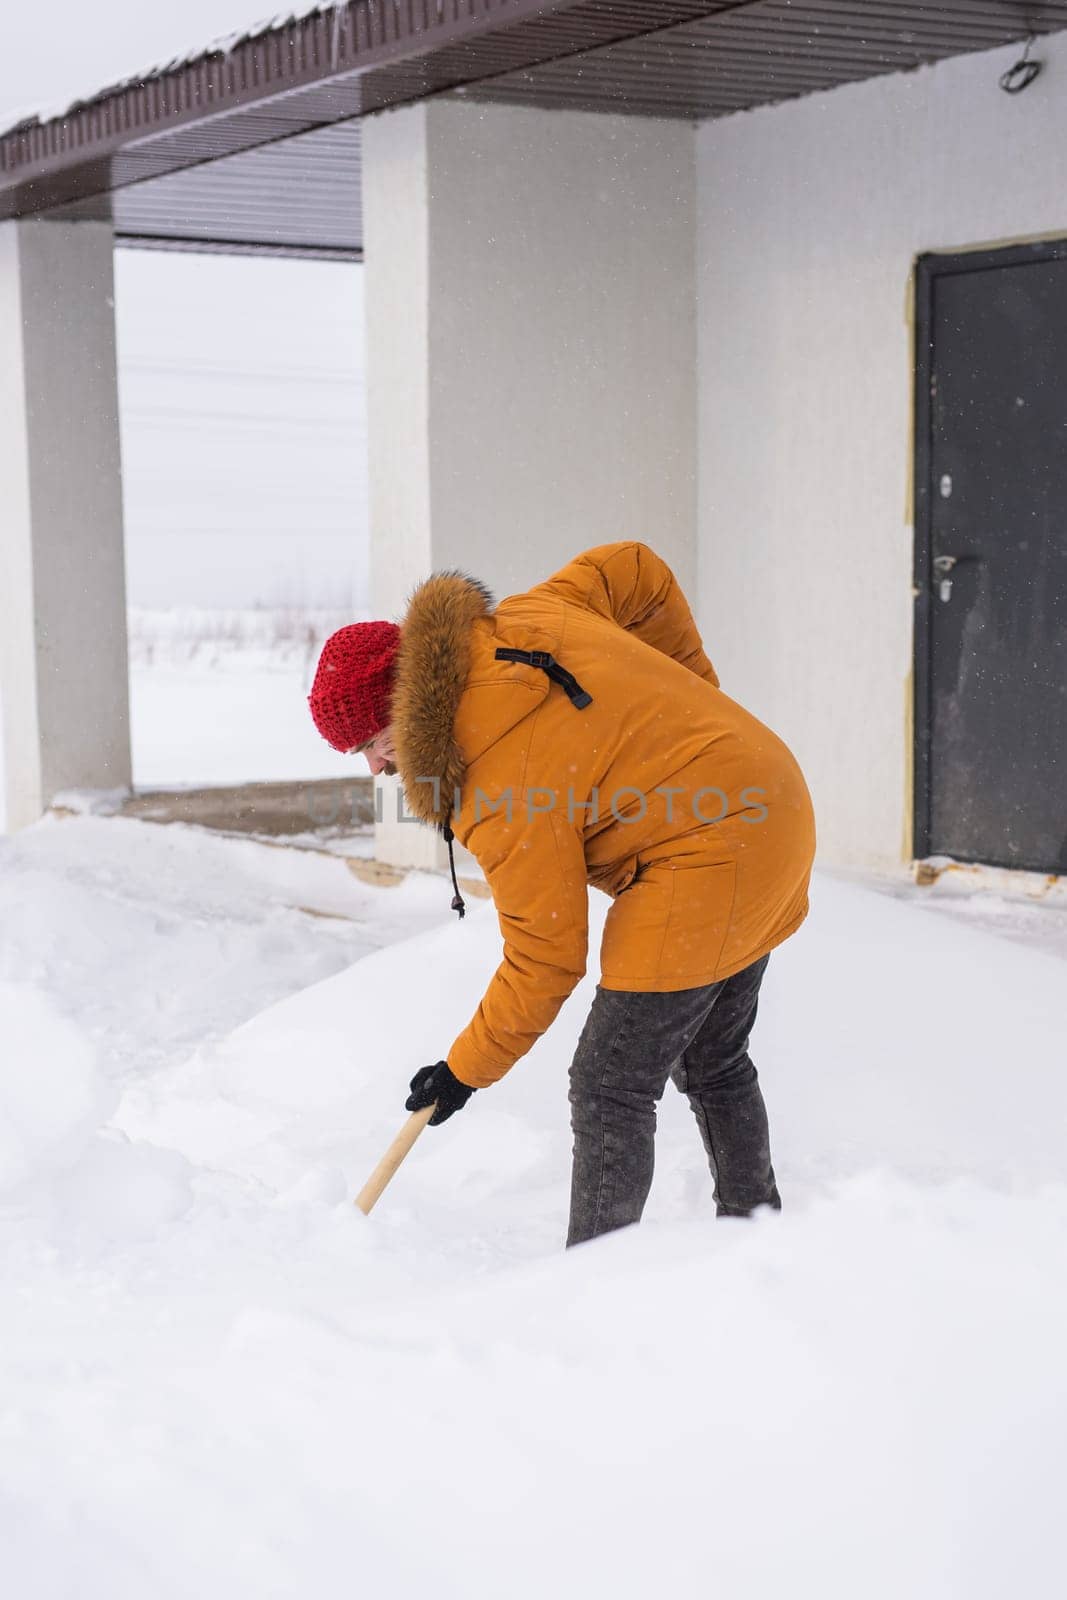 Man is clearing the snow near house and on staircases hovelling at the winter season. Winter storm and season specific by Satura86